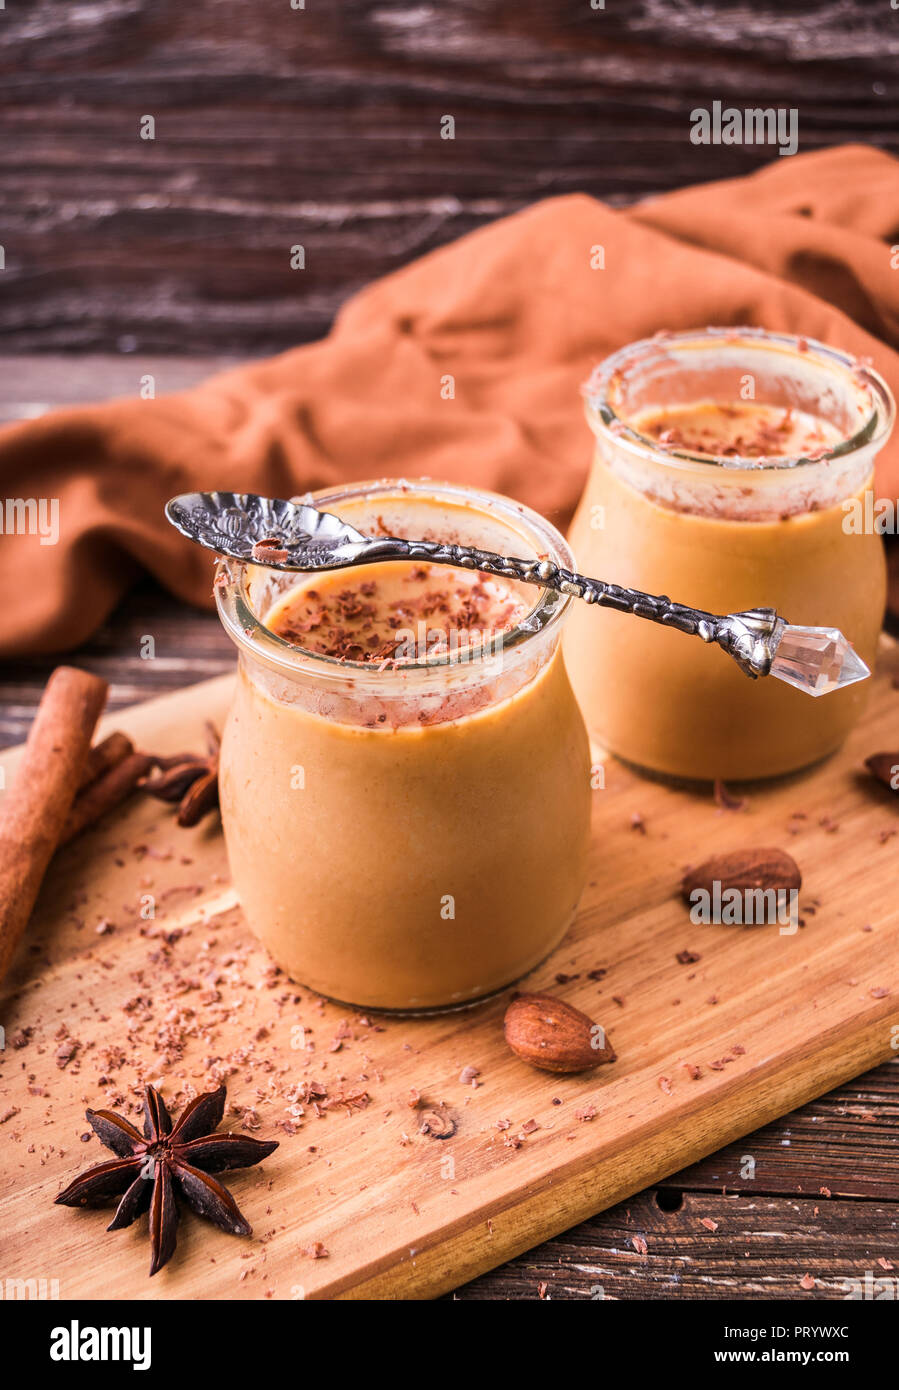 Toffee caramel dessert in jar, sprinkled with grated chocolate. On wooden board, decorated with cinnamon rolls, almonds and star anise. Rustic wooden  Stock Photo